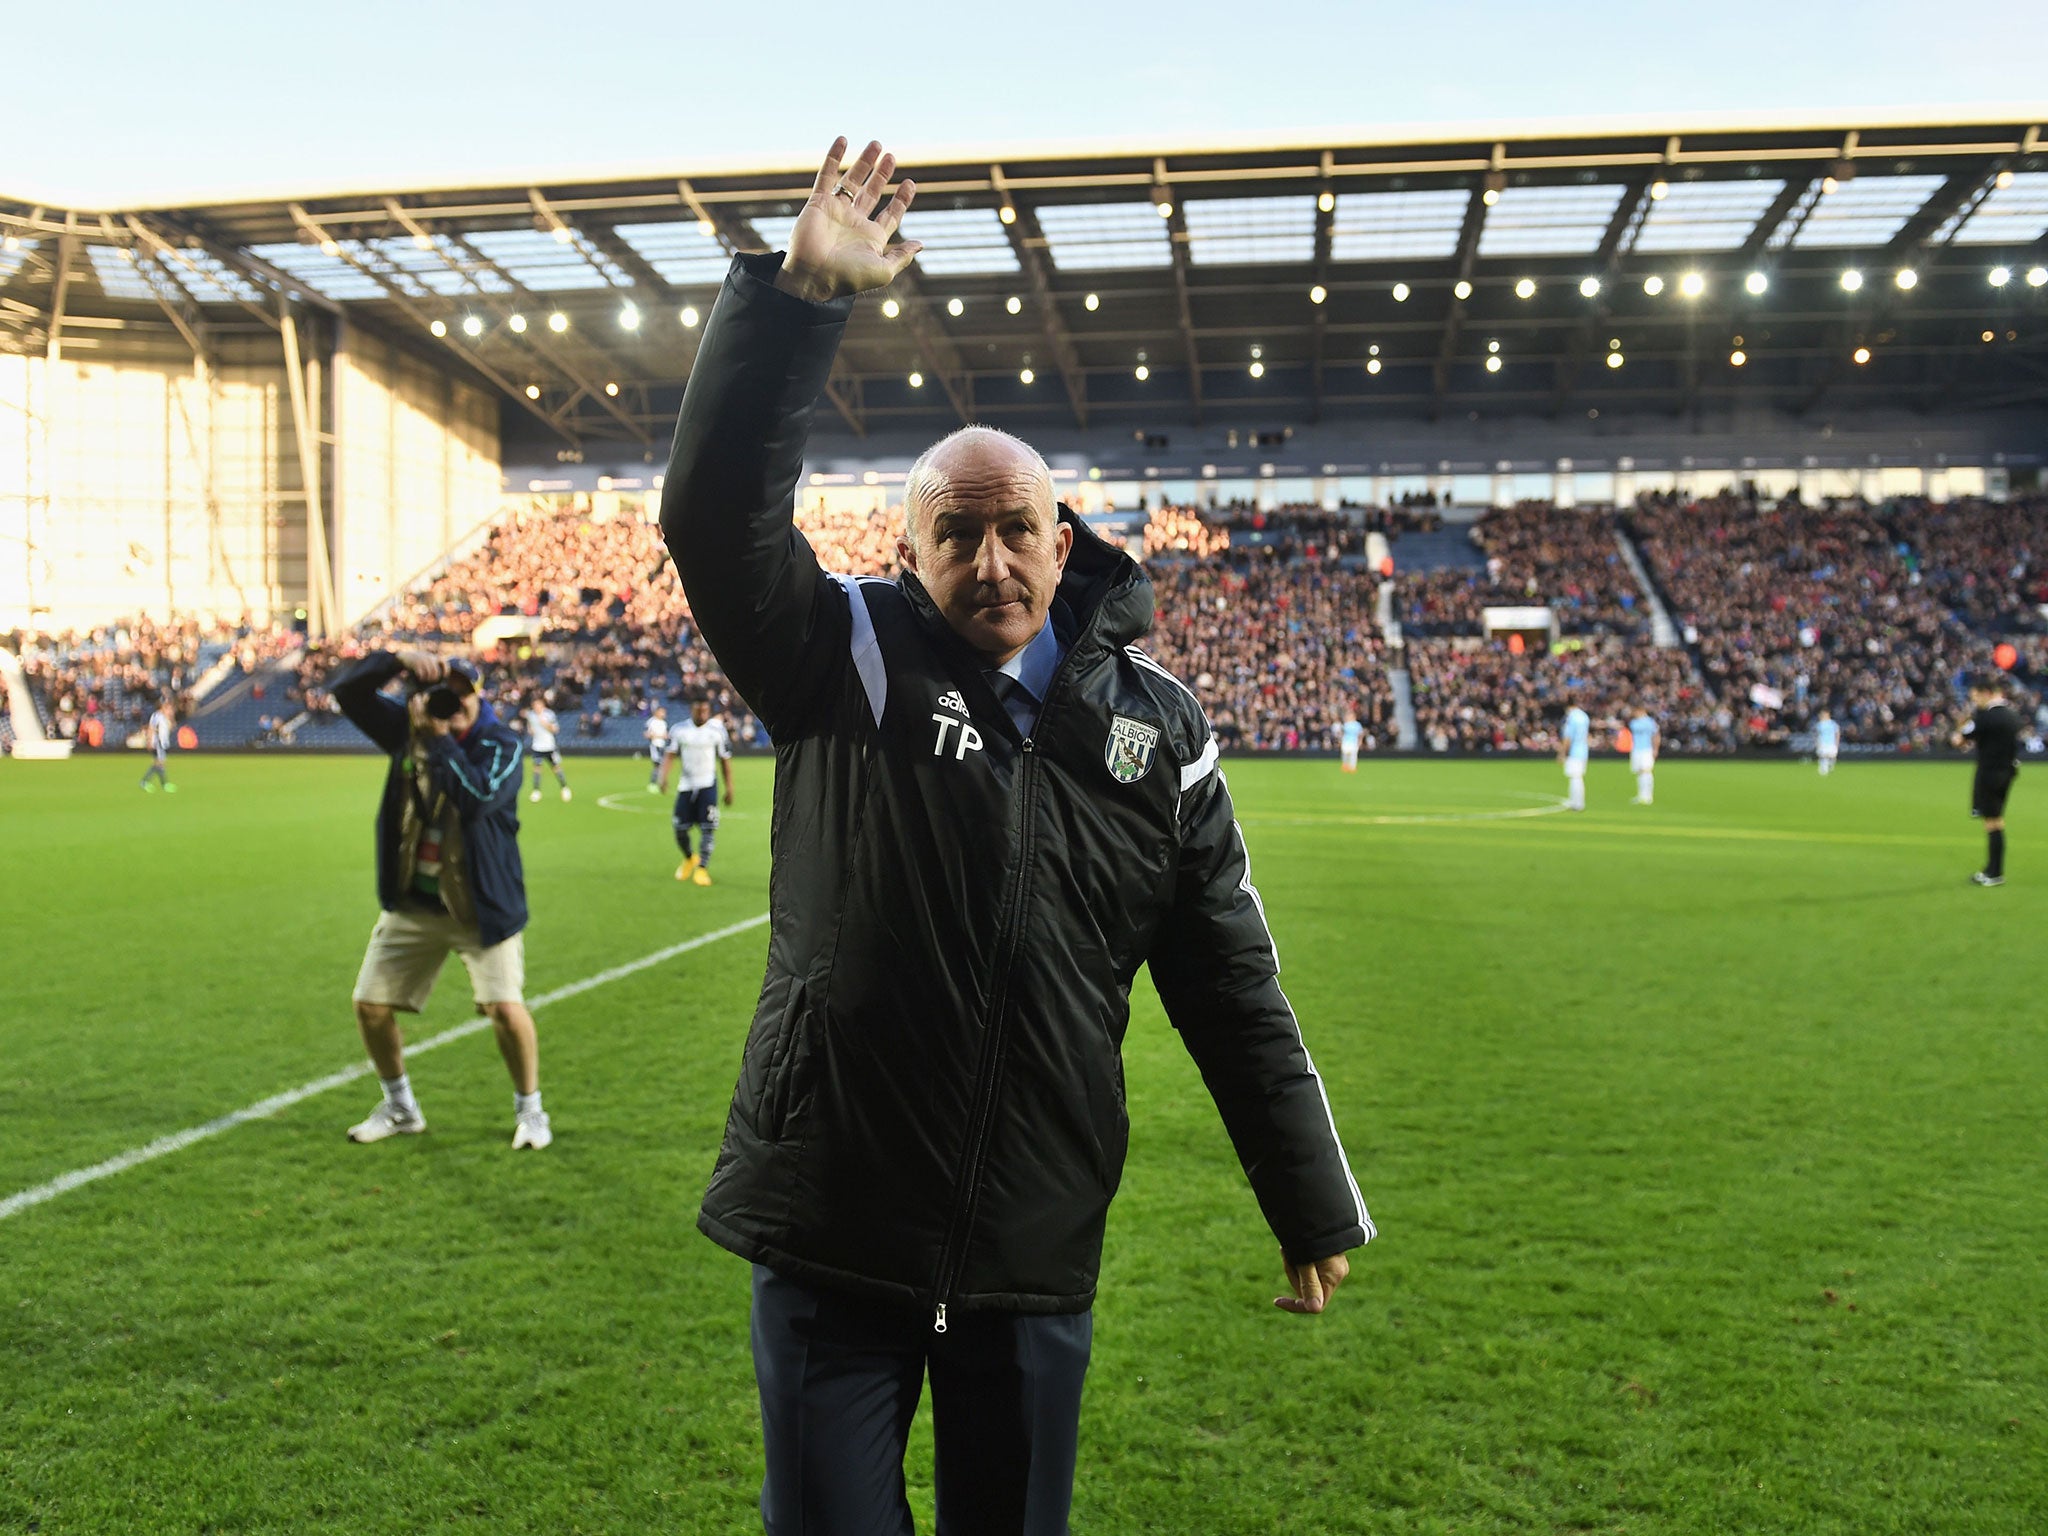 Tpny Pulis waves to the crowd ahead of his first game in charge of West Brom